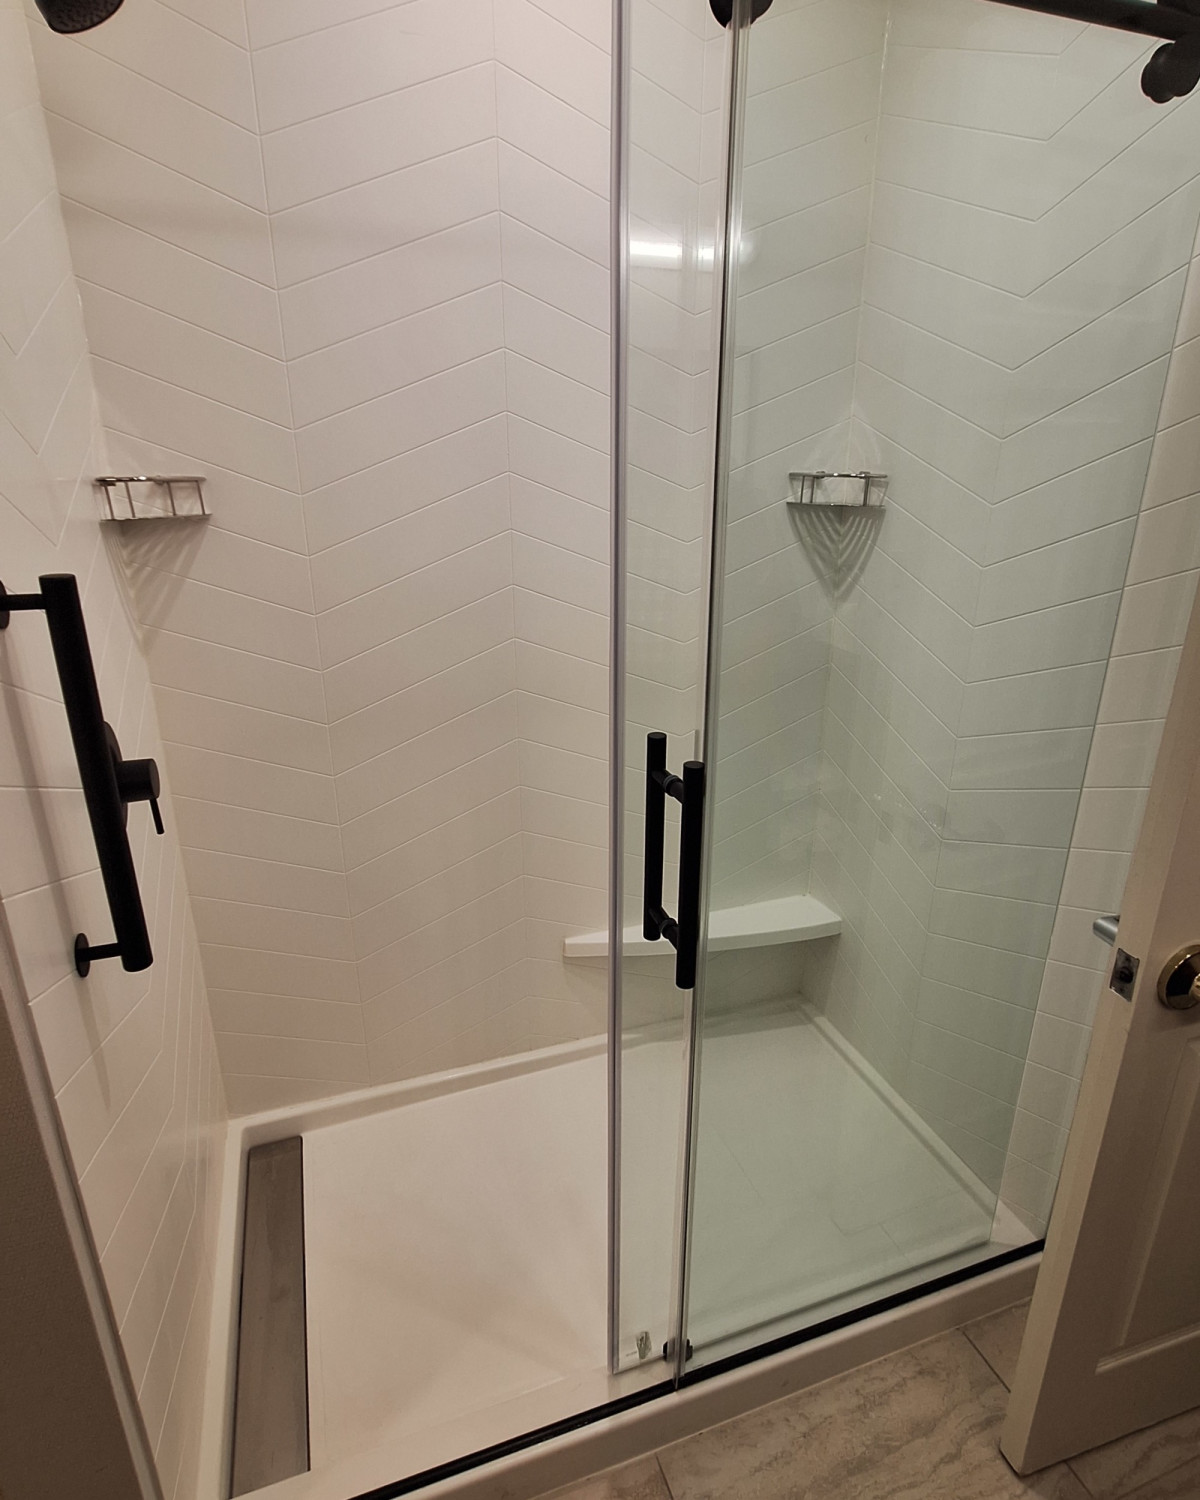 A photo of a shower with a glass door